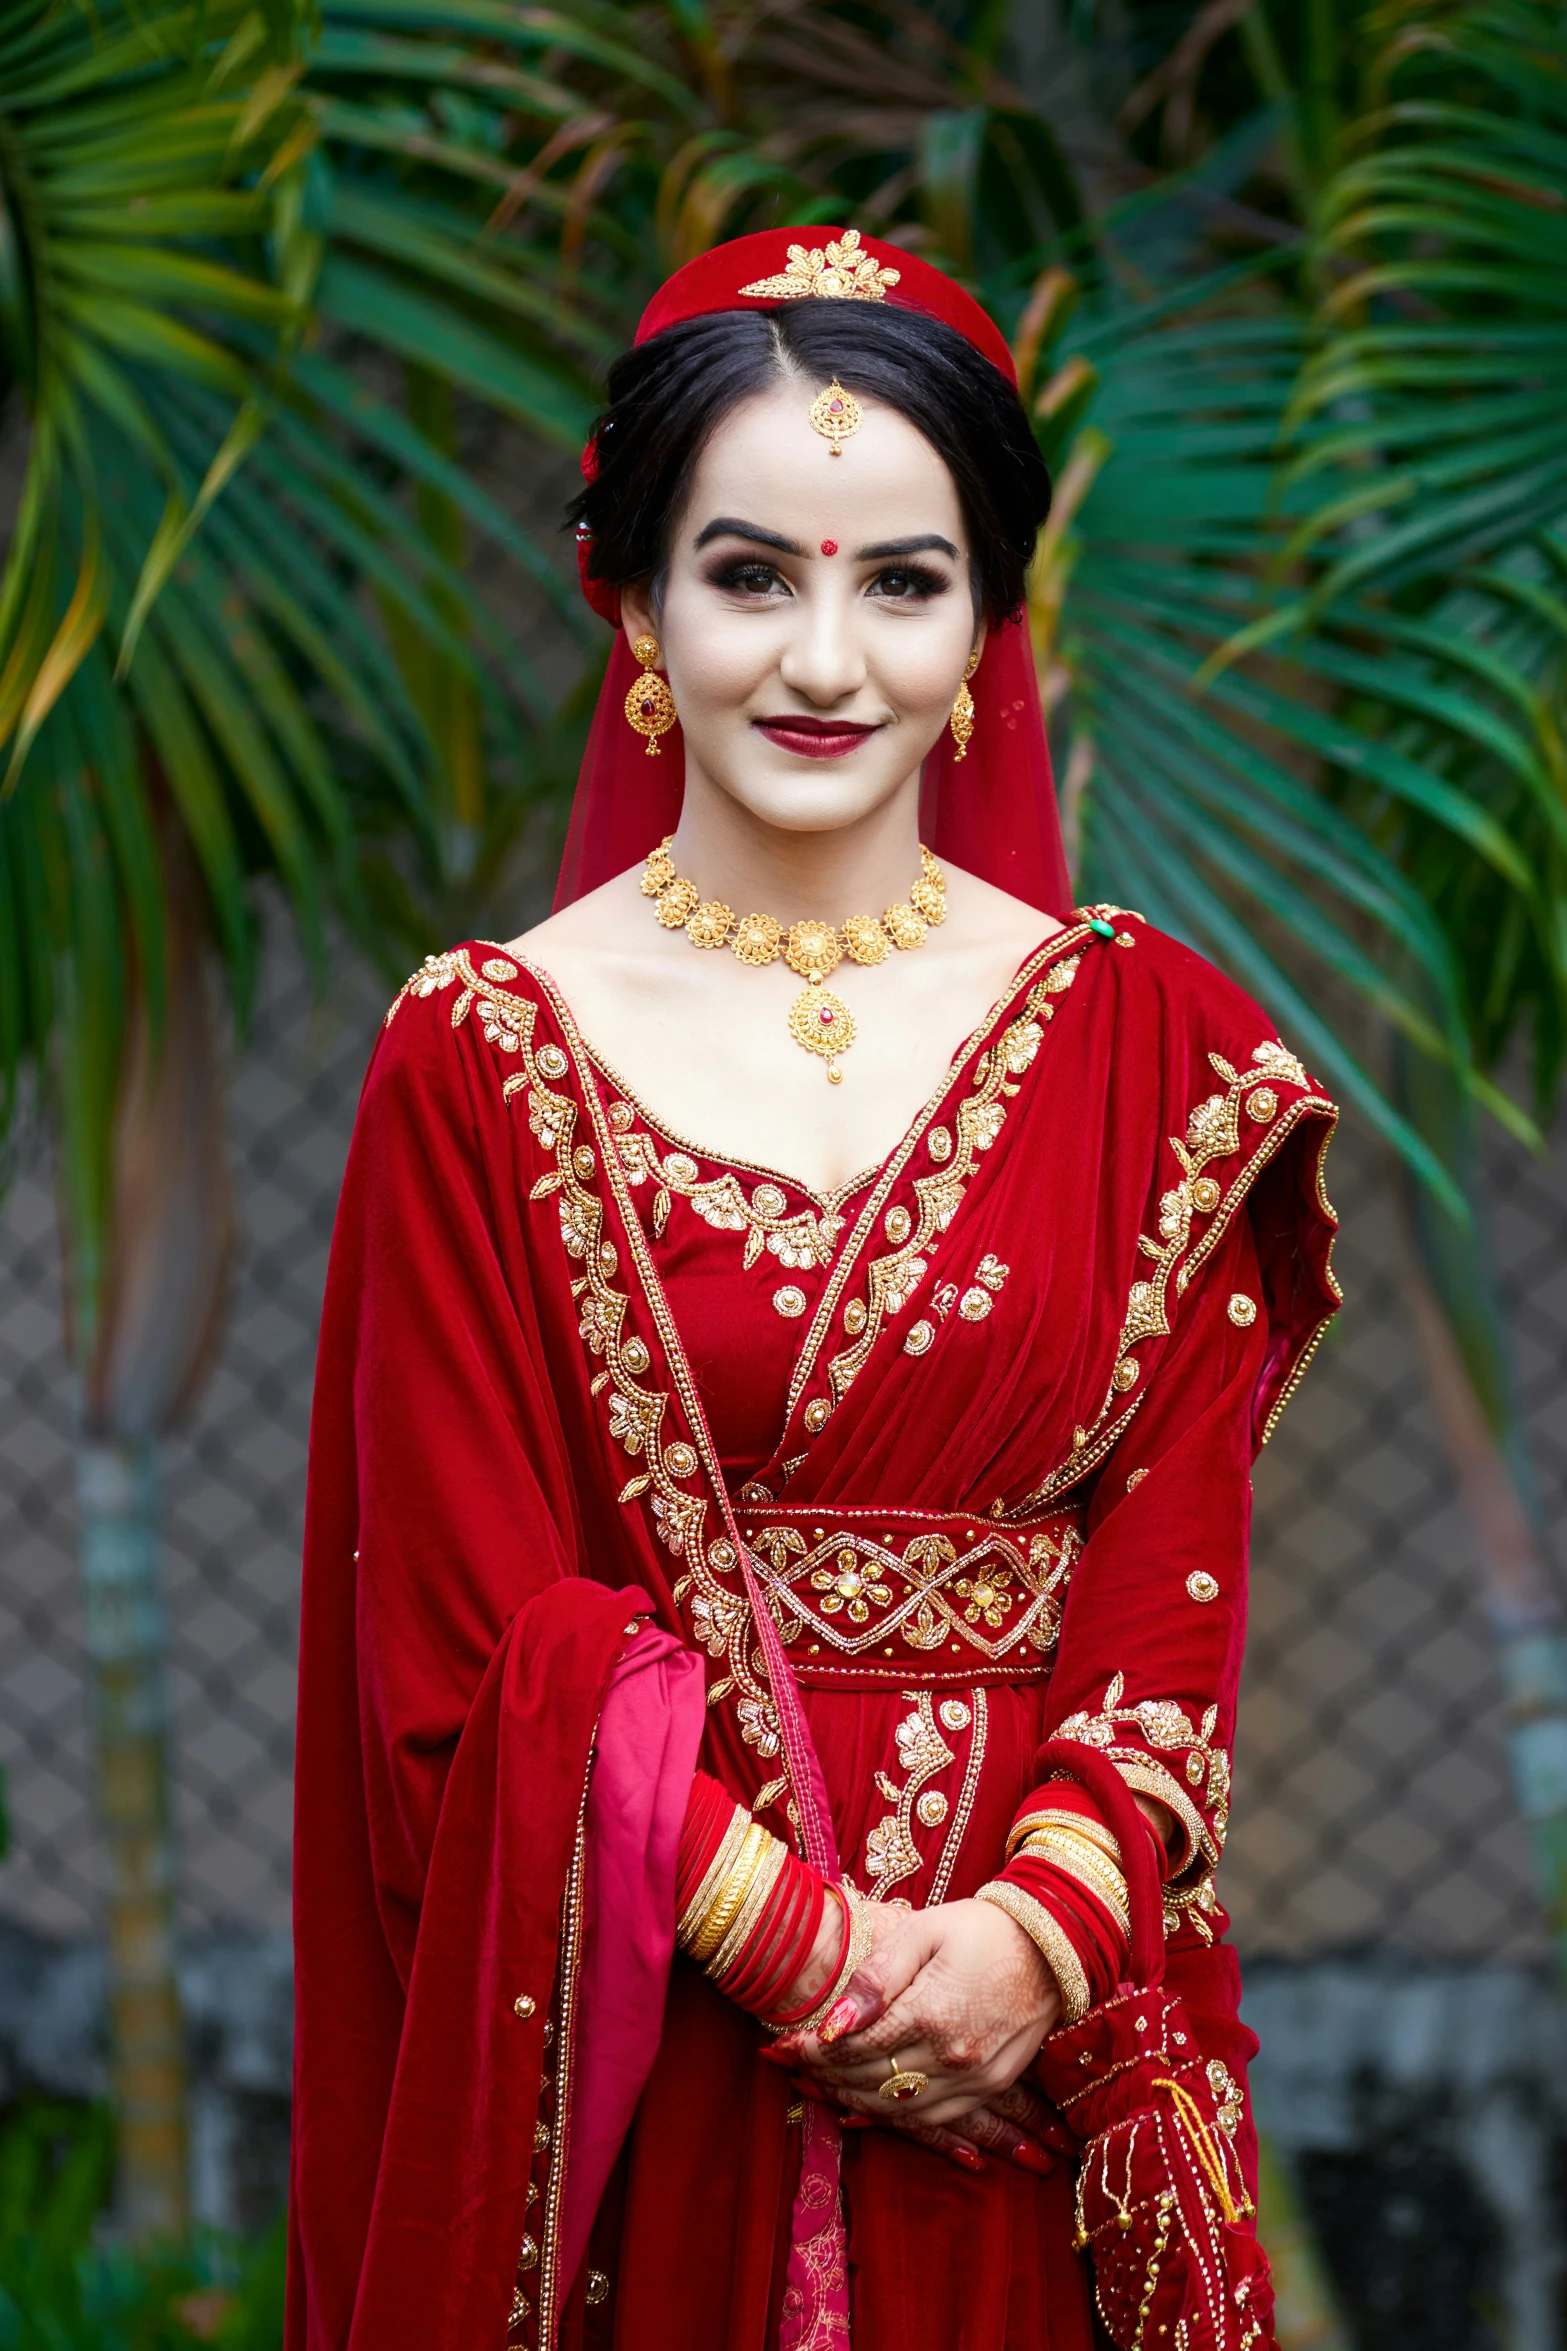 a person dressed in red and gold wearing a costume